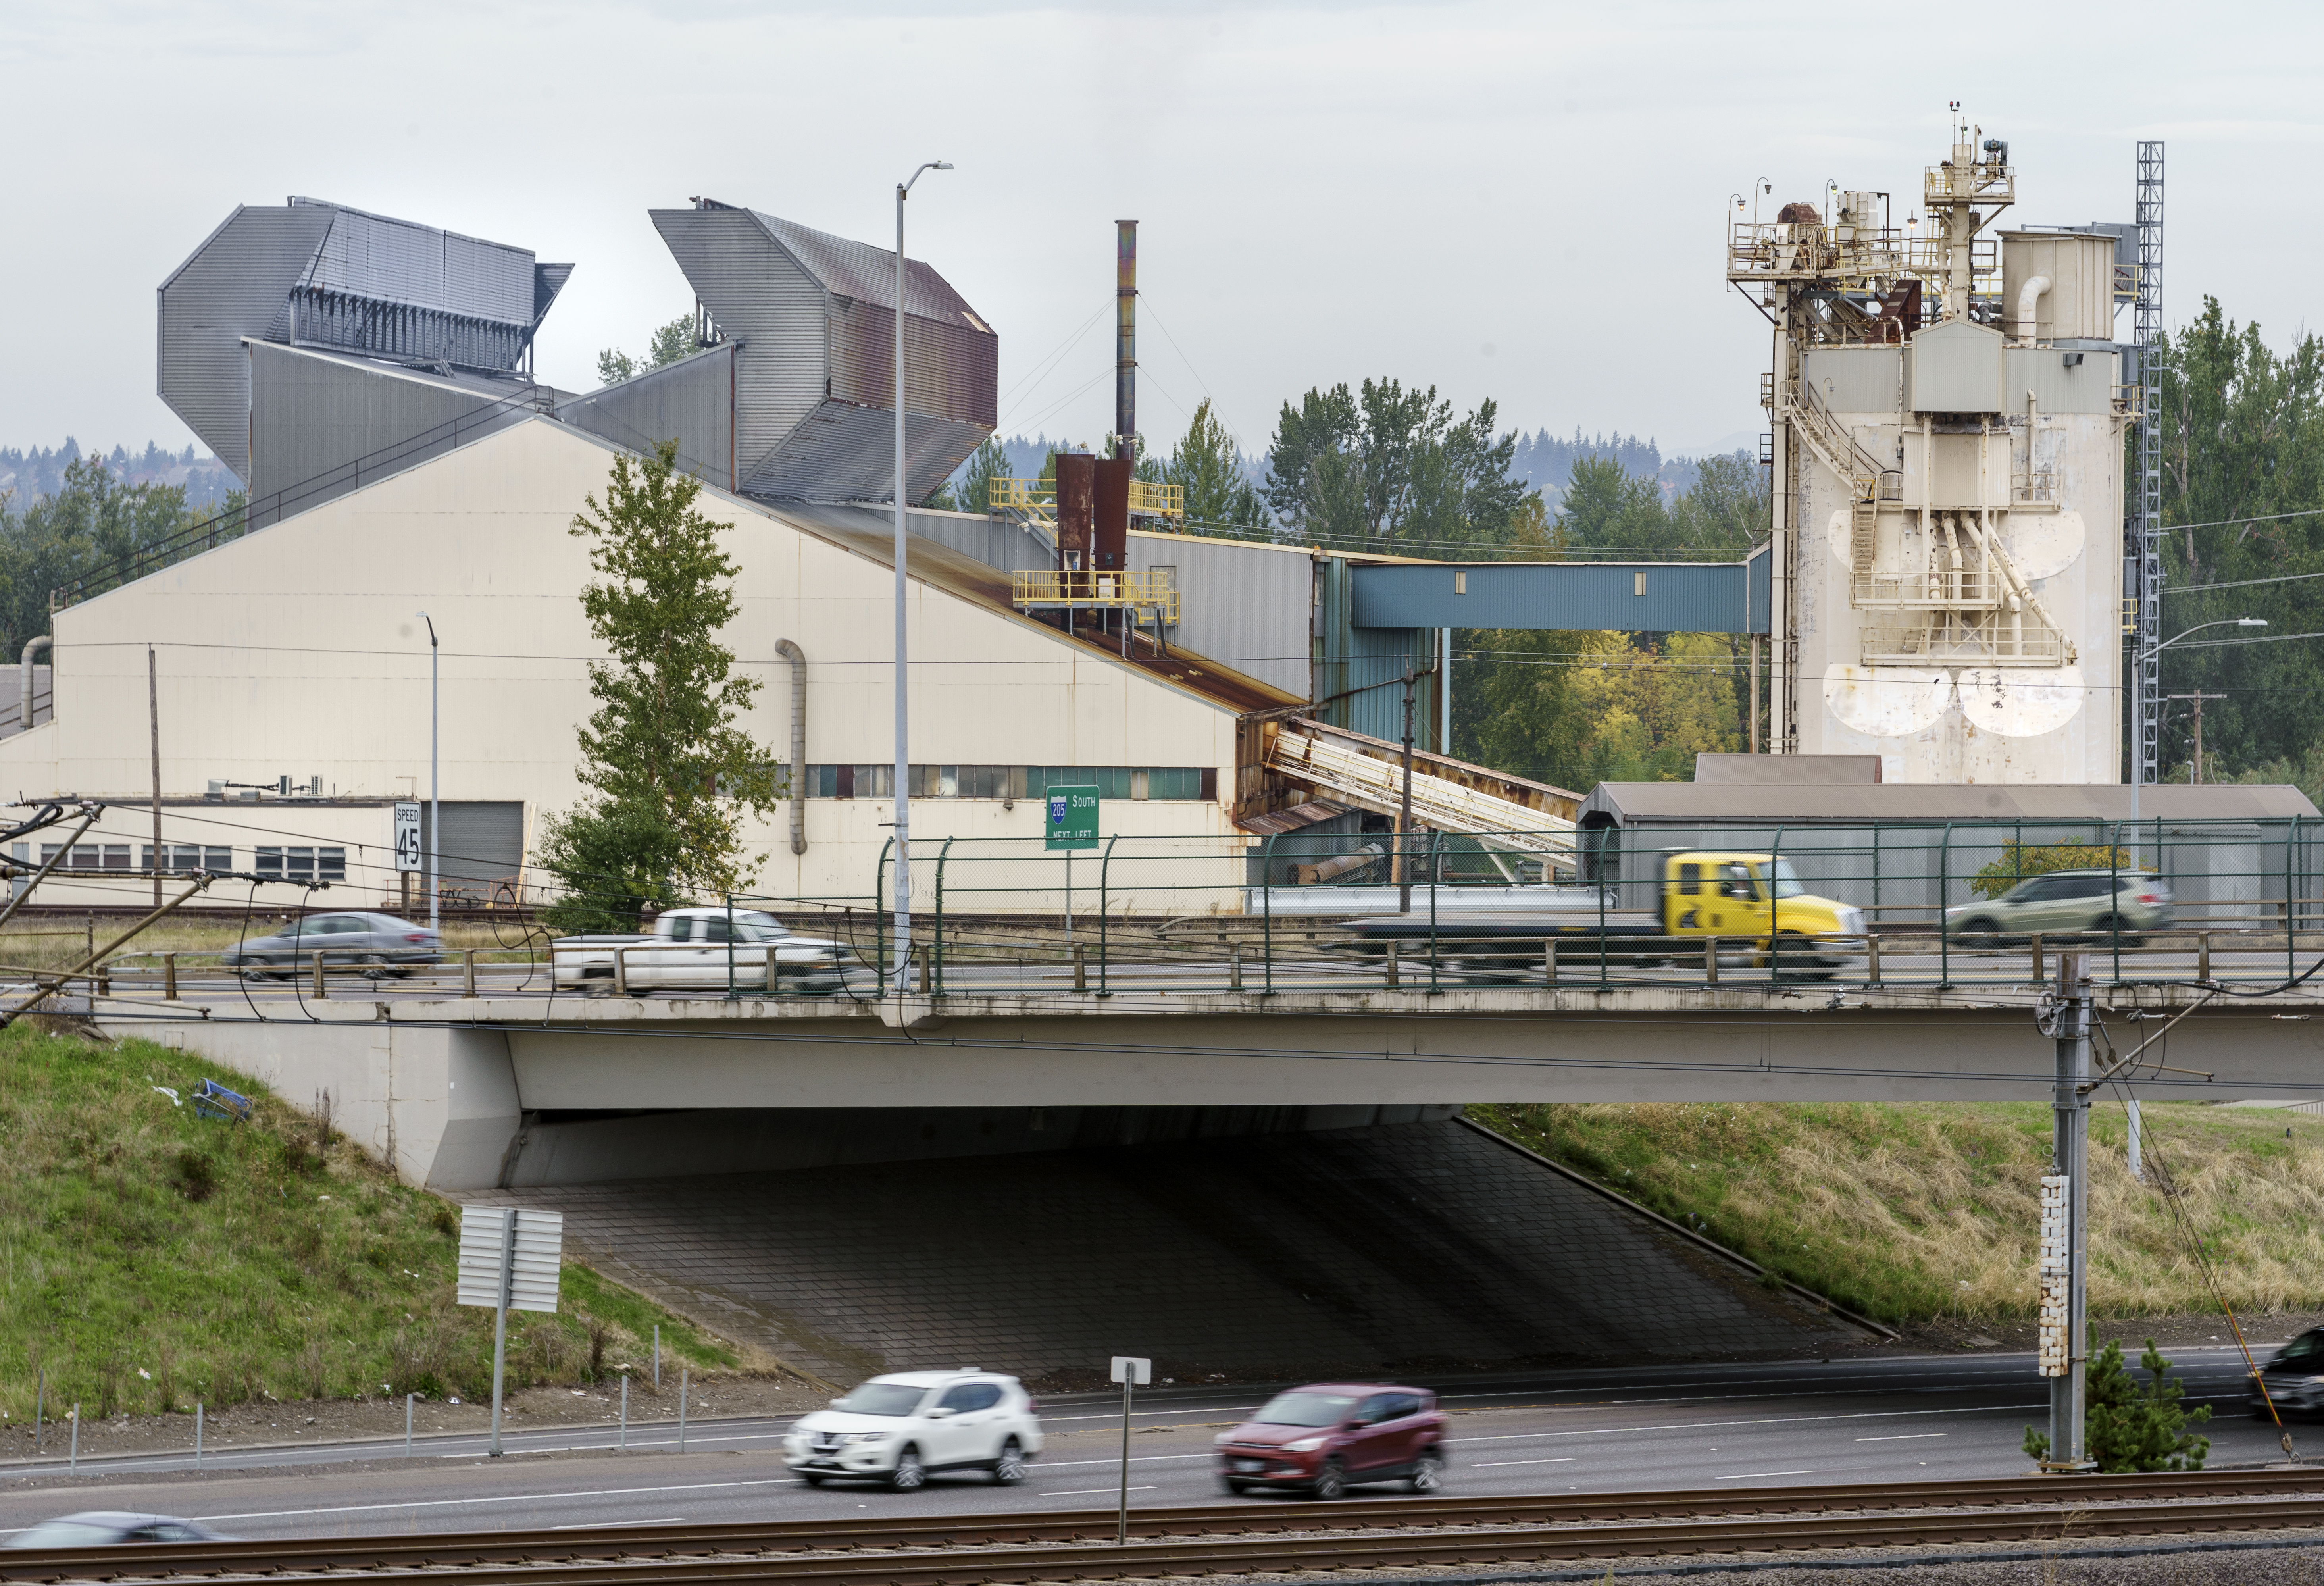 According to a recent air modeling study, the Owens-Brockway glass-recycling plant is releasing harmful amounts of pollutants and threatening the health of nearby Northeast Portland neighborhoods of Cully, Sumner and Maywood Park. 